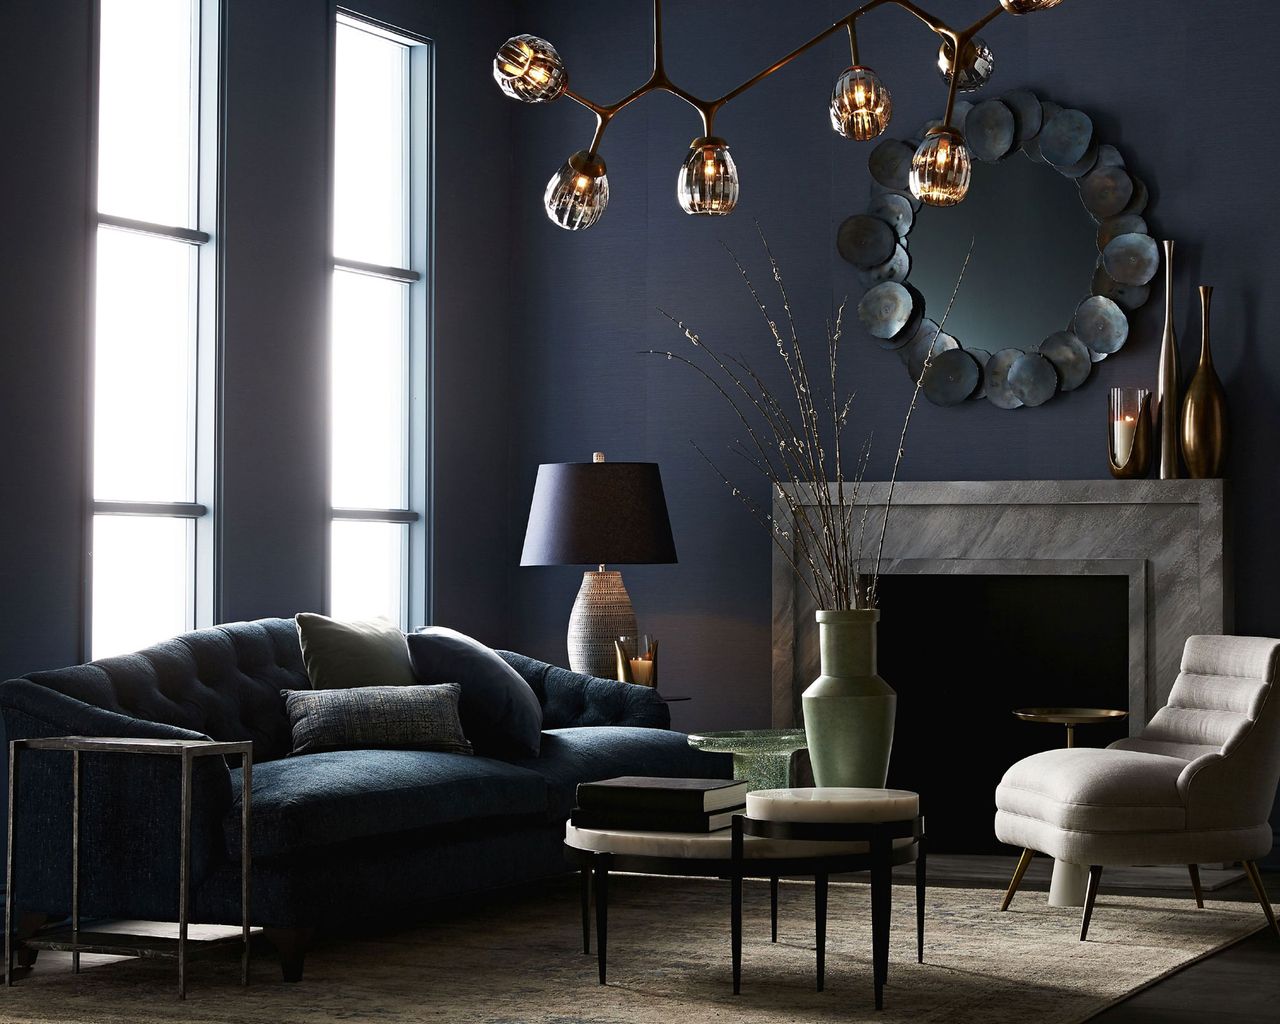 How to plan living room lighting: that fulfills every need